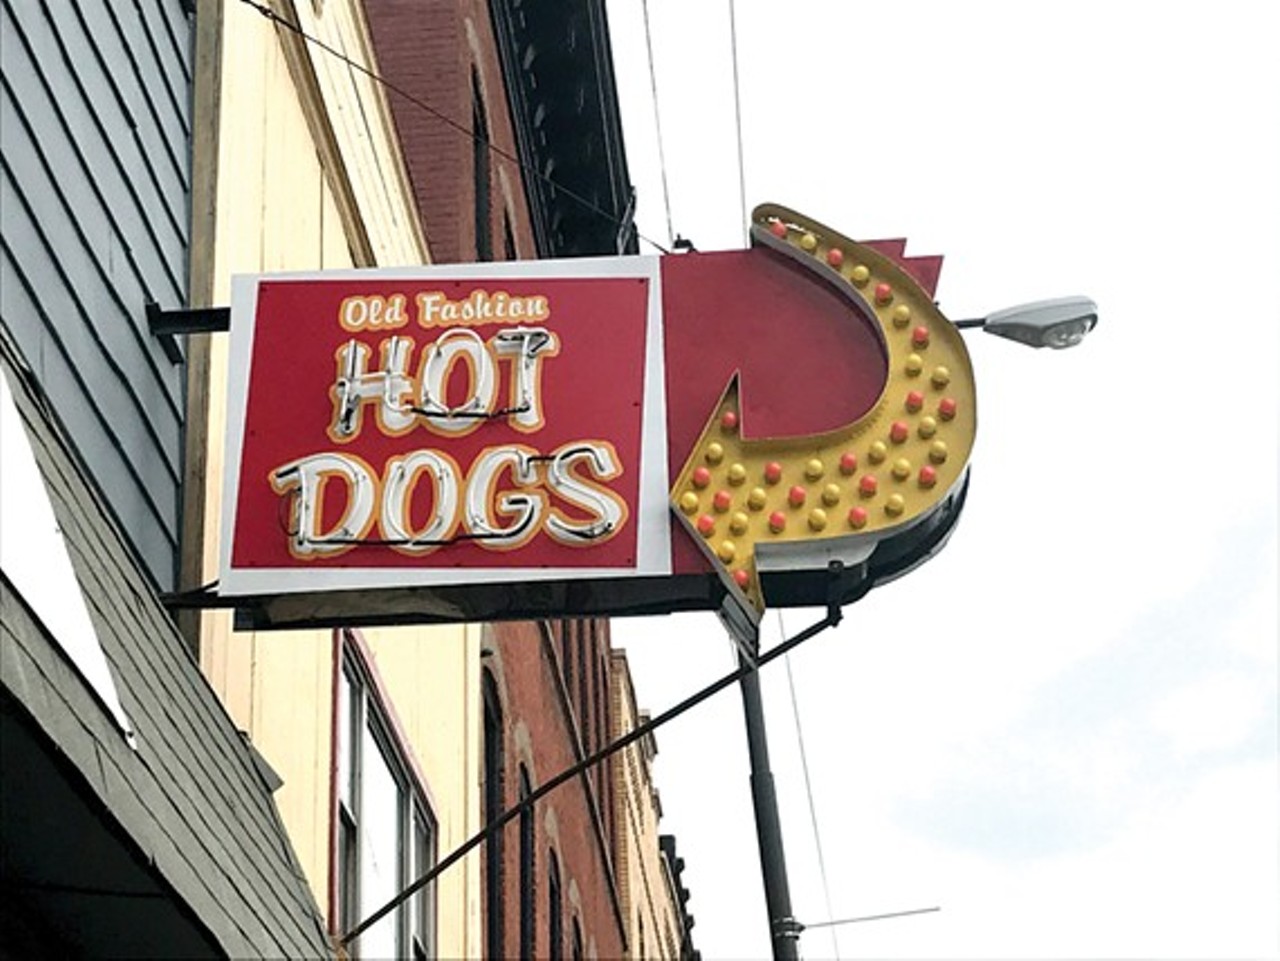 Old Fashioned Hot Dogs (Inn)
4008 Lorain Ave.
This is the place to go to taste the ultimate chili dog. Its Americana atmosphere is perfect for family outings and nostalgia. The service is fast and friendly, allowing for take-out orders and walk-ins. 
Photo by Billy Hallal